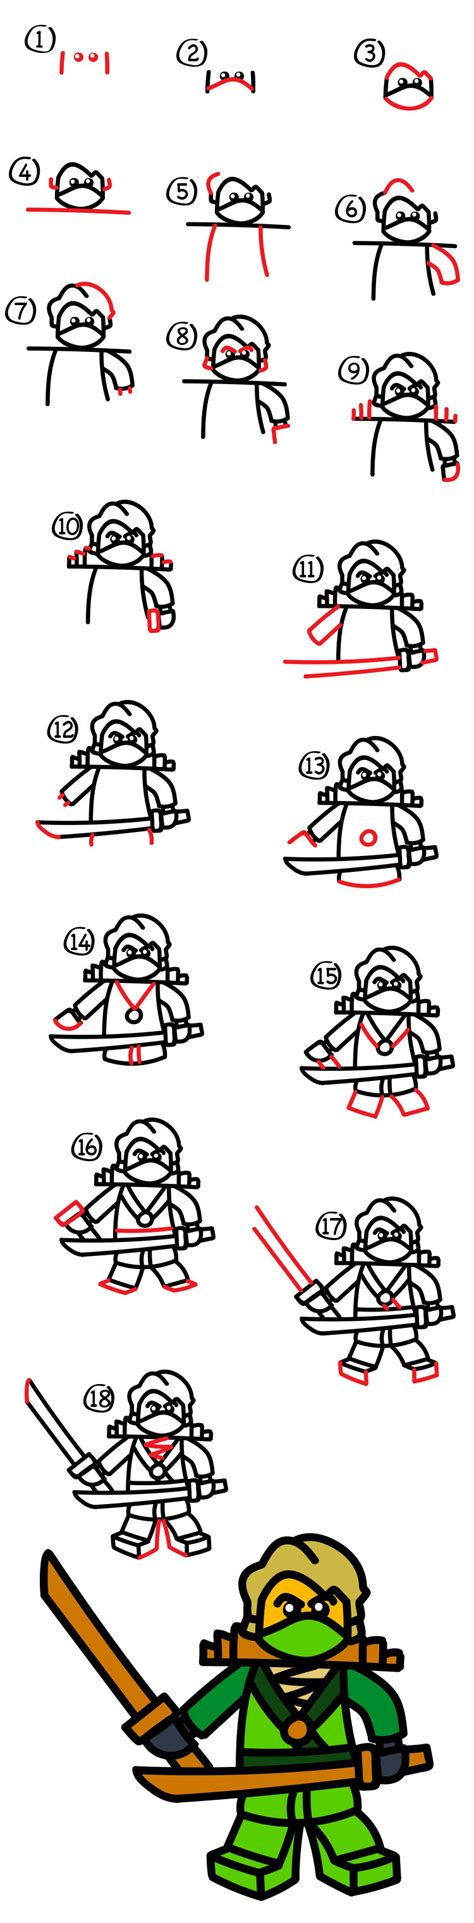 How To Draw Lloyd From Lego Ninjago Simpson Acers1990